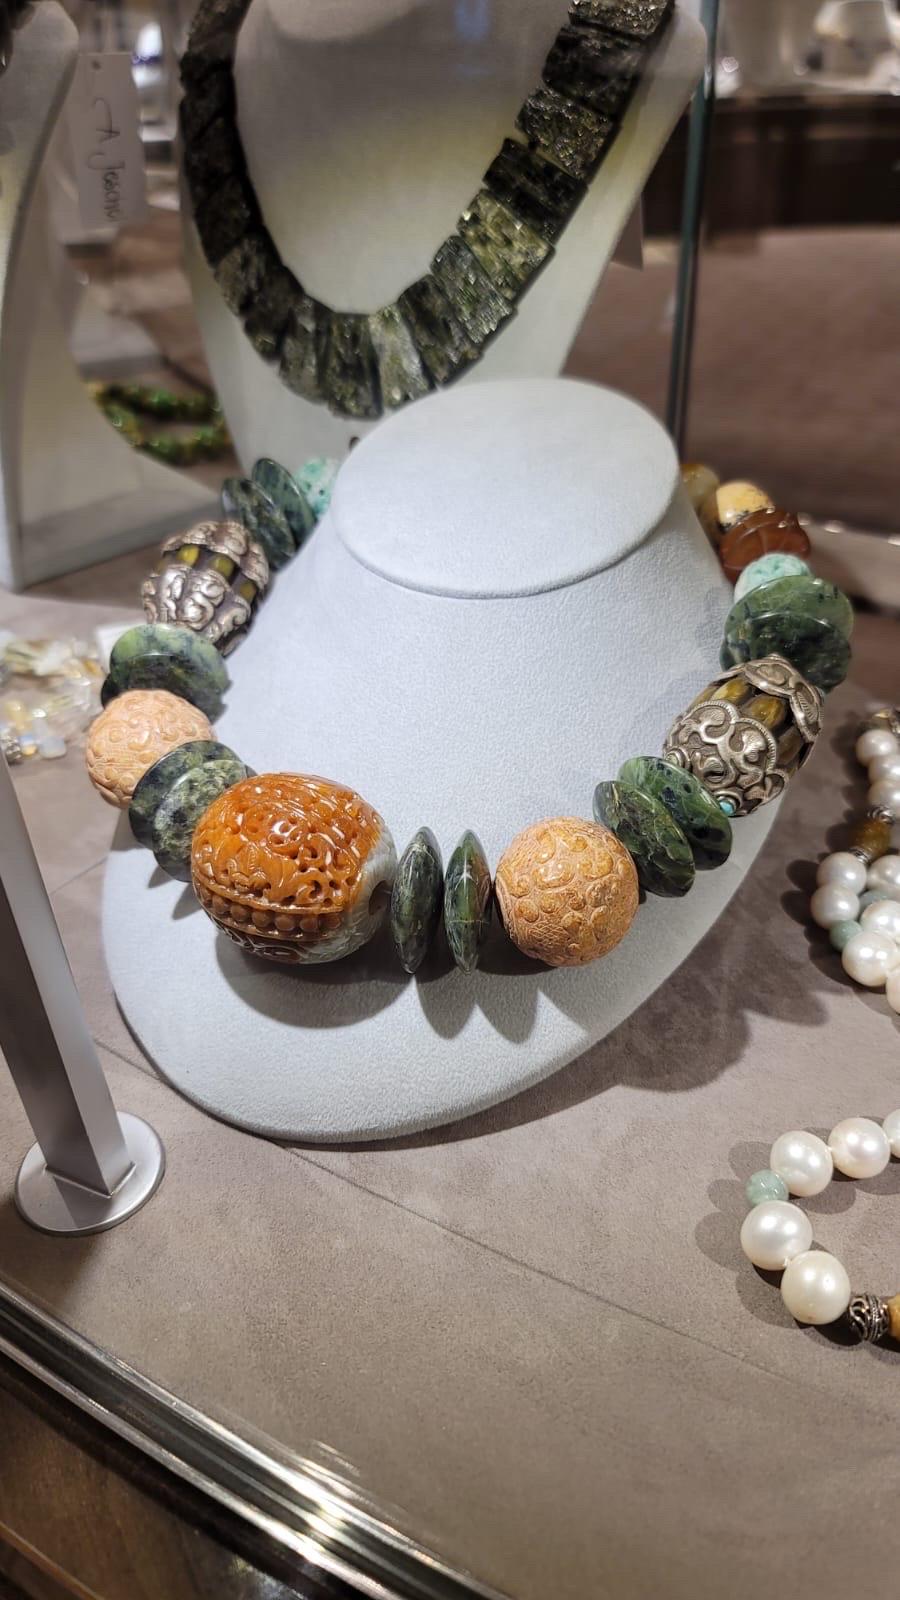 In this exquisite necklace, a harmonious composition of 27 distinct beads comes together, each possessing its own intriguing story. These beads blend seamlessly to create a stunning statement of complementary colors, captivating forms, and enticing